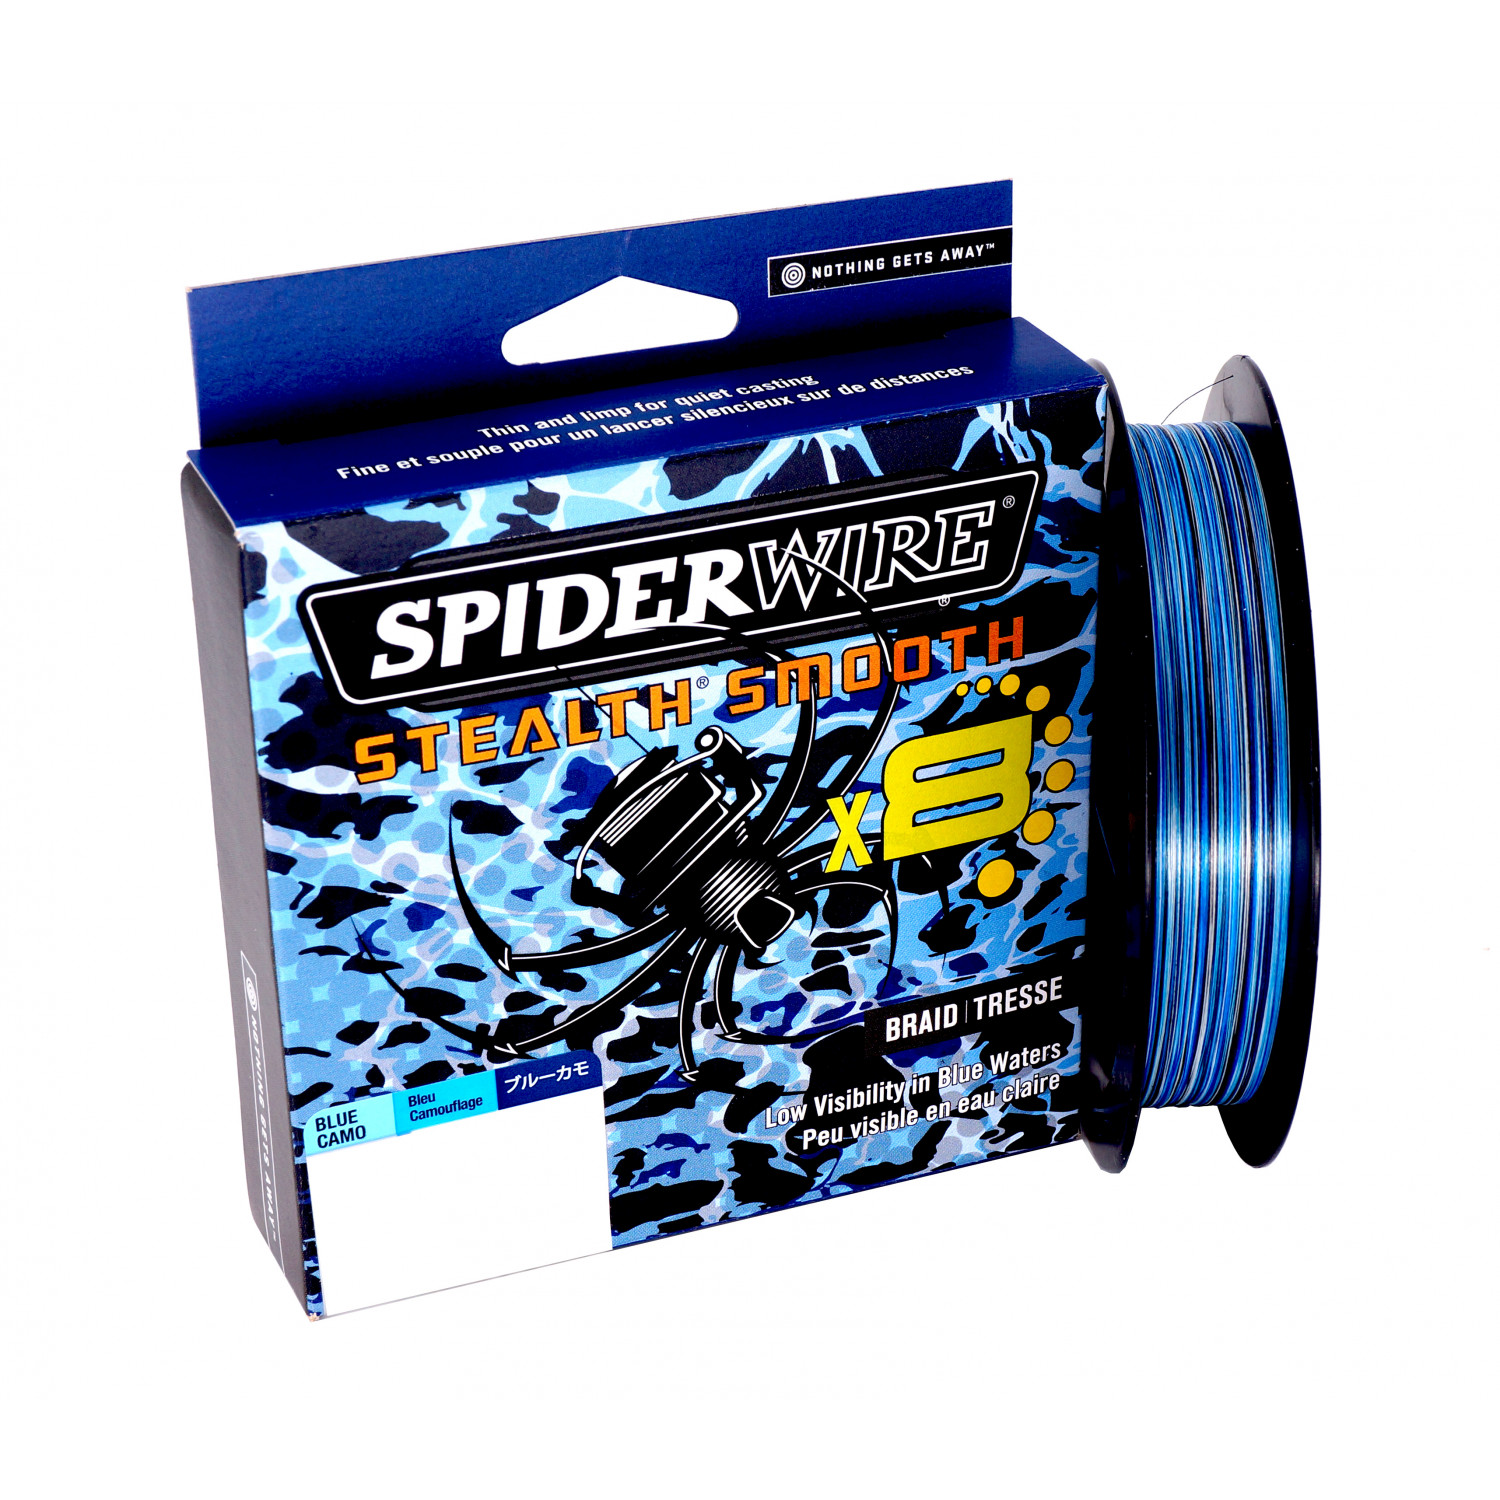 SPIDERWIRE Stealth Smooth braided fishing line camouflage blue 300